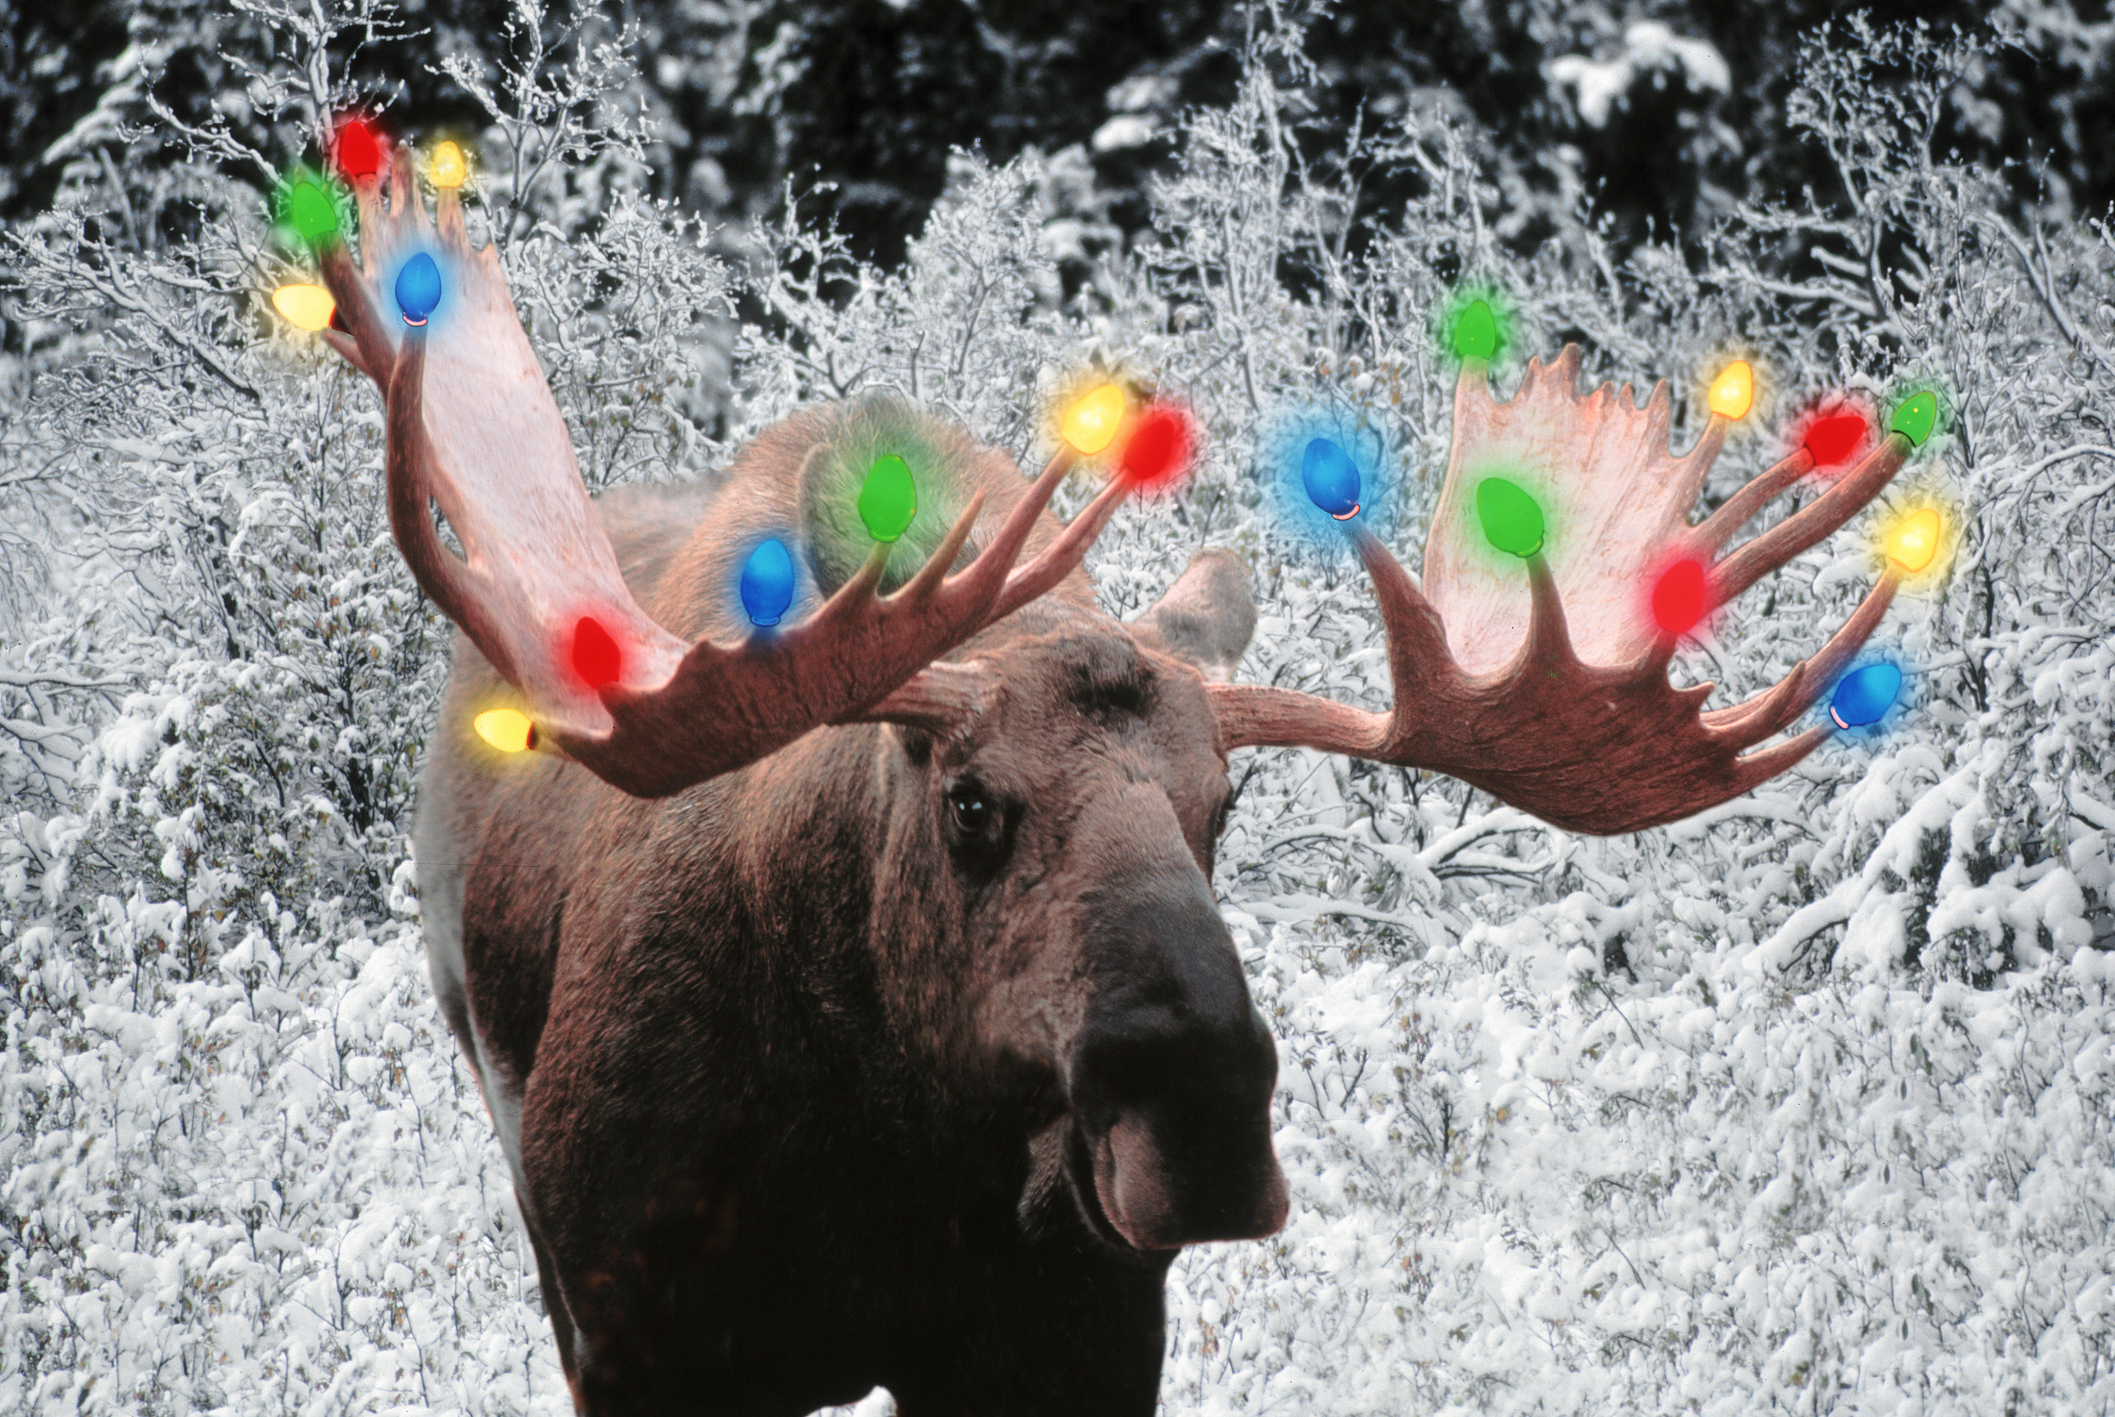 A moose with Christmas lights on its antlers